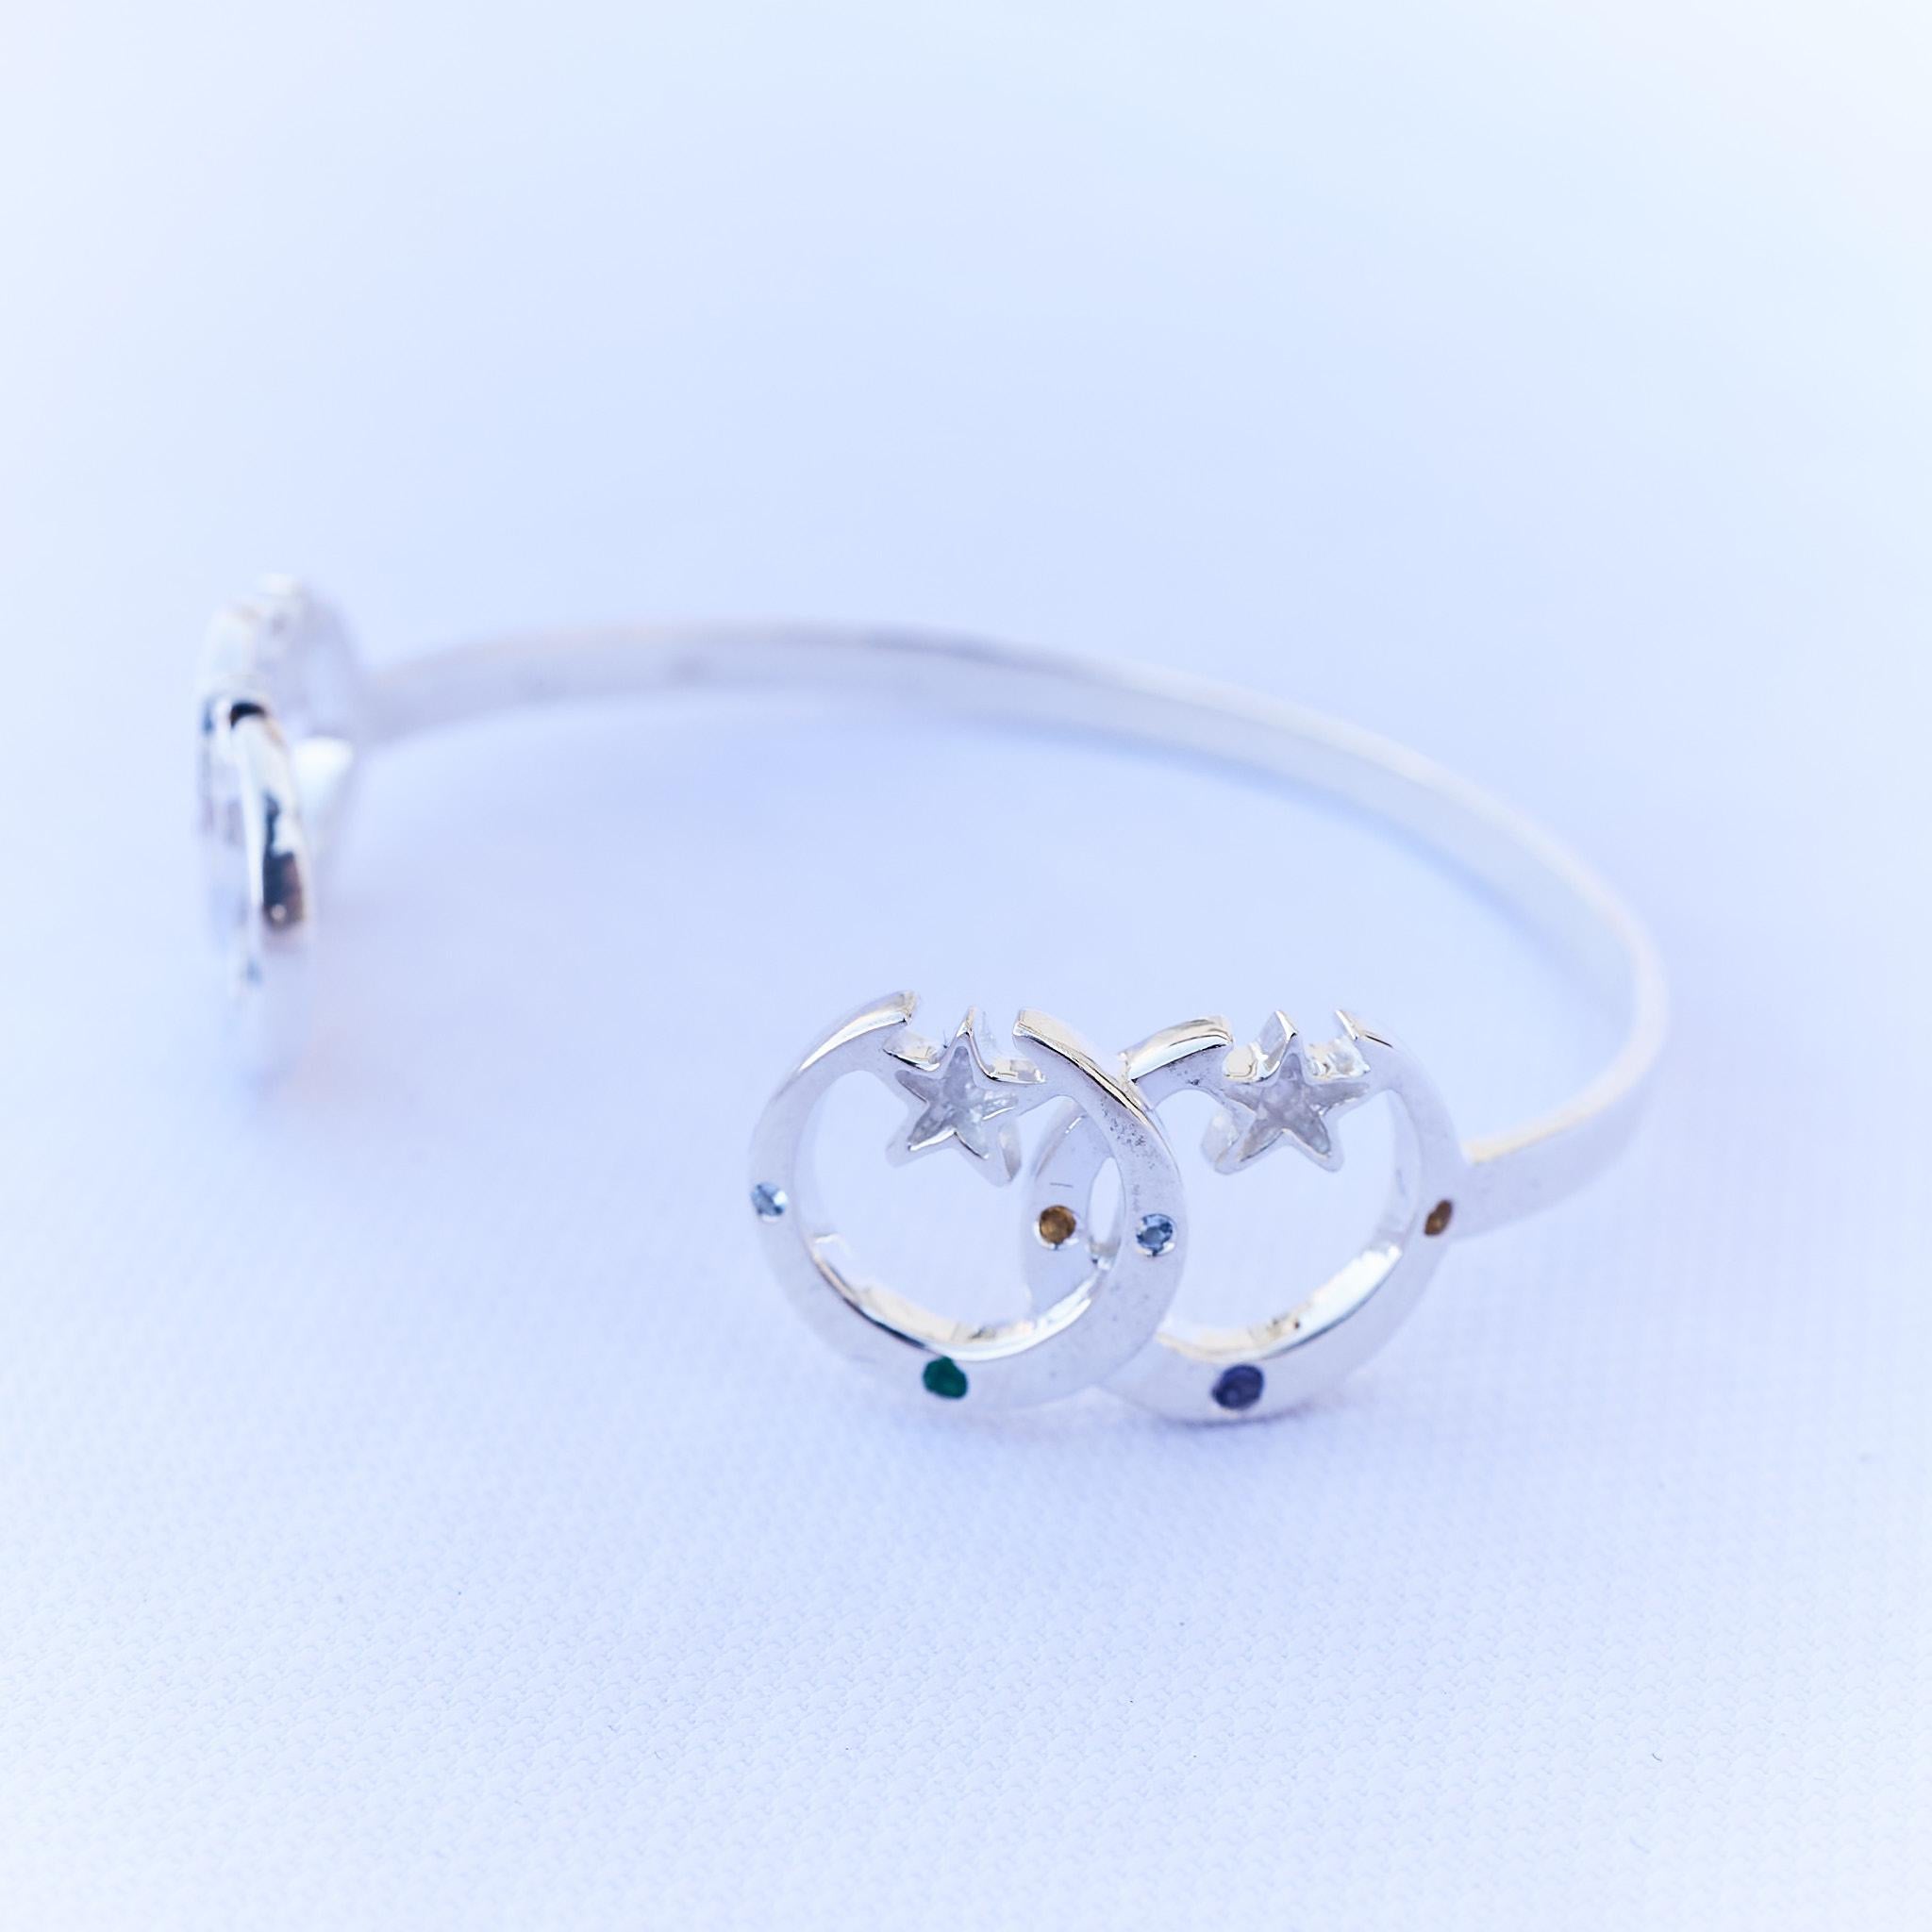 Emerald Aquamarine Iolite Orange Sapphire Crescent Moon Bangle Bracelet Silver 
Designer: J Dauphin
J DAUPHIN 

Inspiration:
This bracelet symbolize the power of the moon and stars in our life symbolizing the eternal universe and our souls purpose.